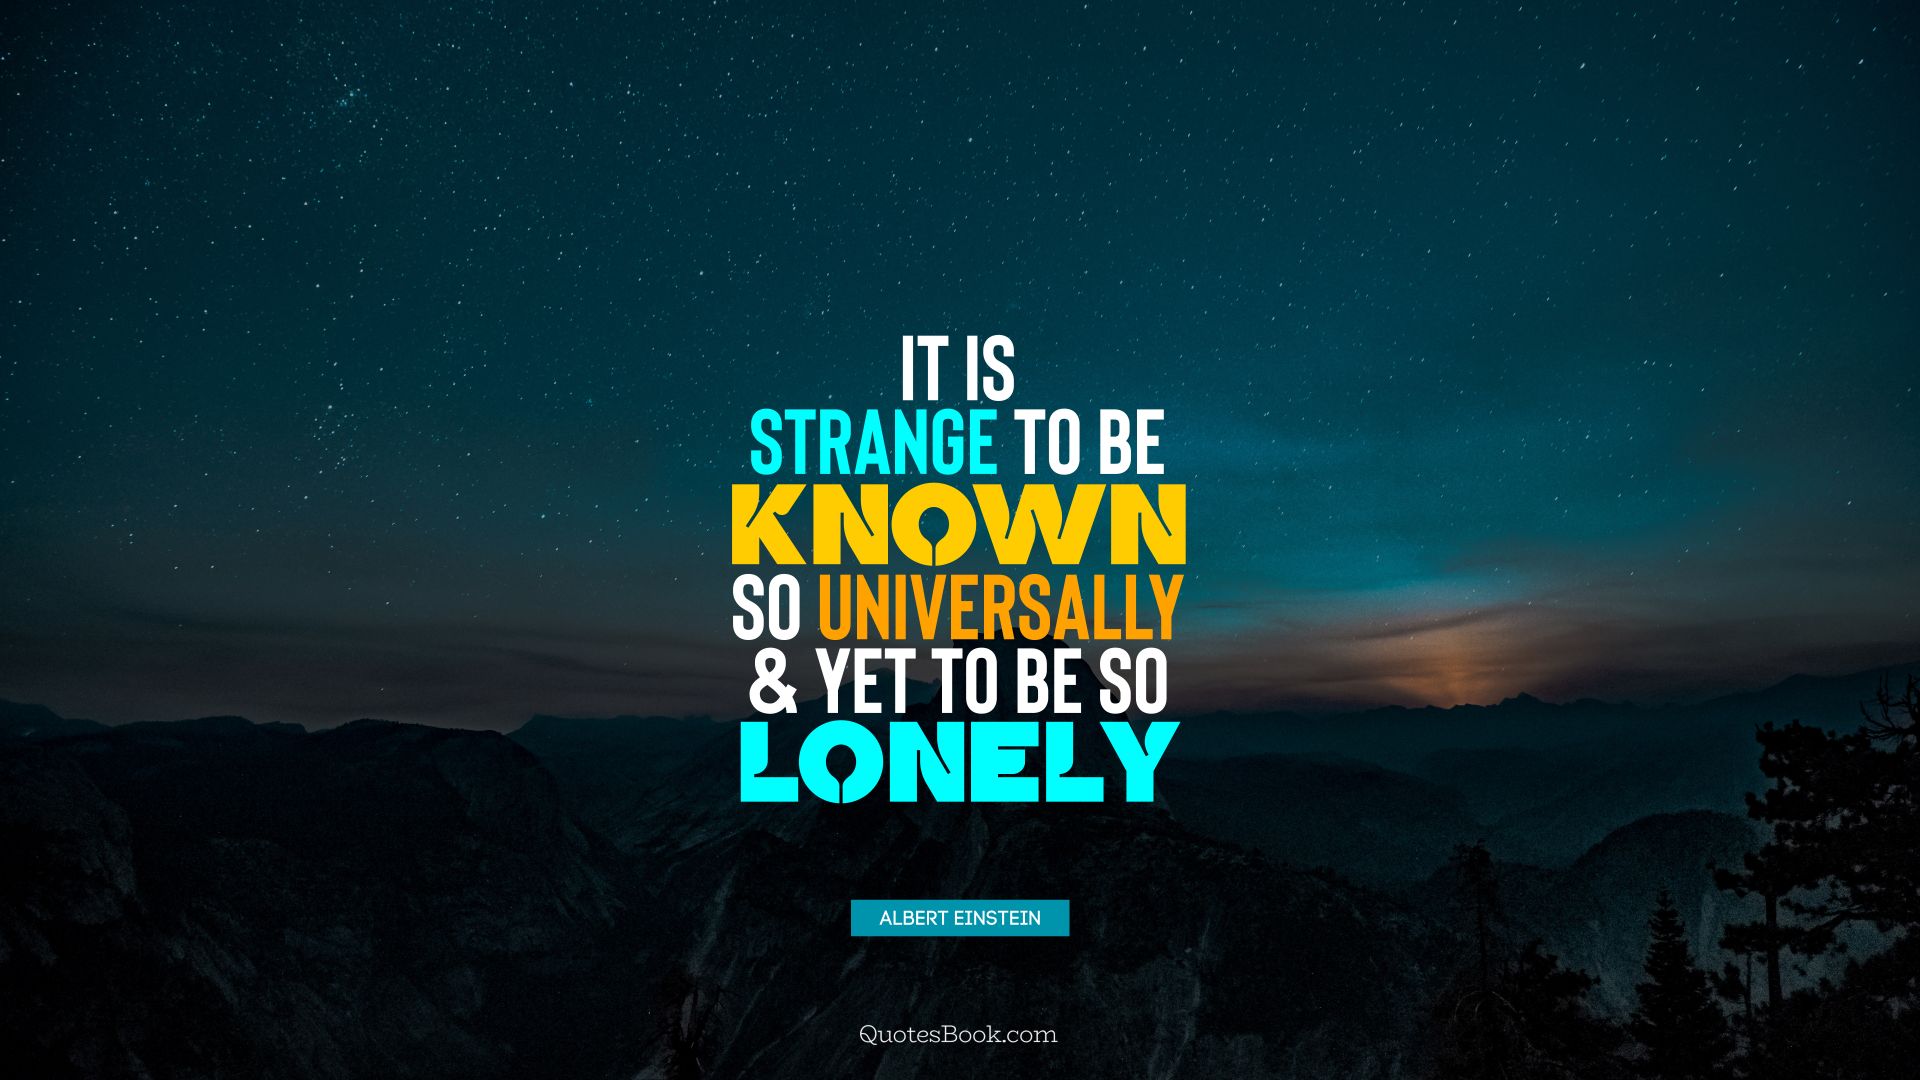 It is strange to be known so universally and yet to be so lonely. - Quote by Albert Einstein